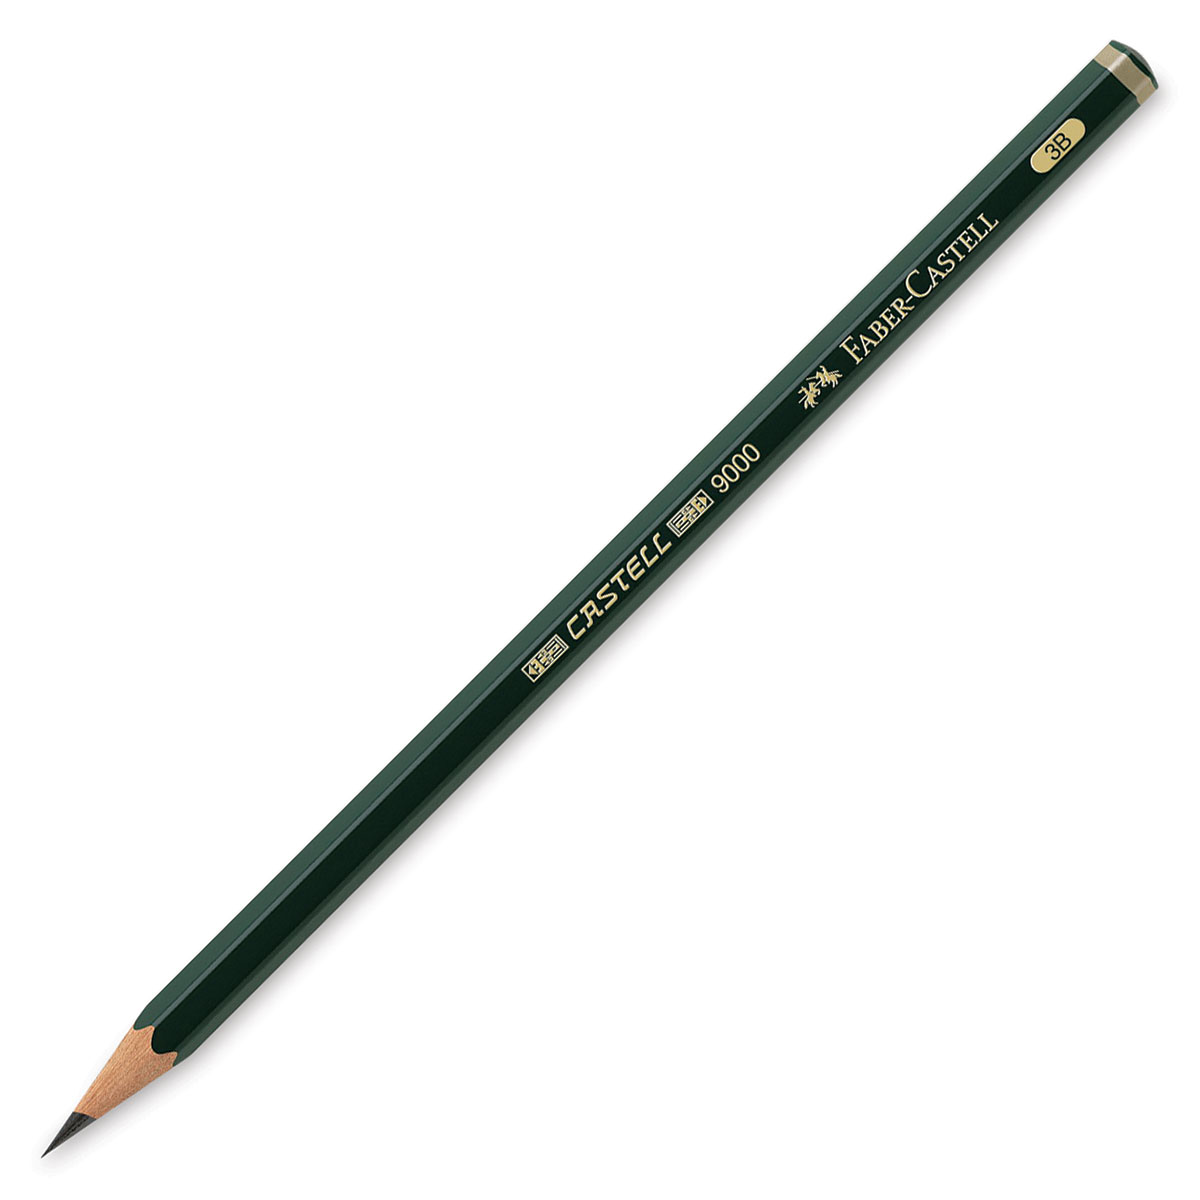 Faber Castell Pencil 9000 B